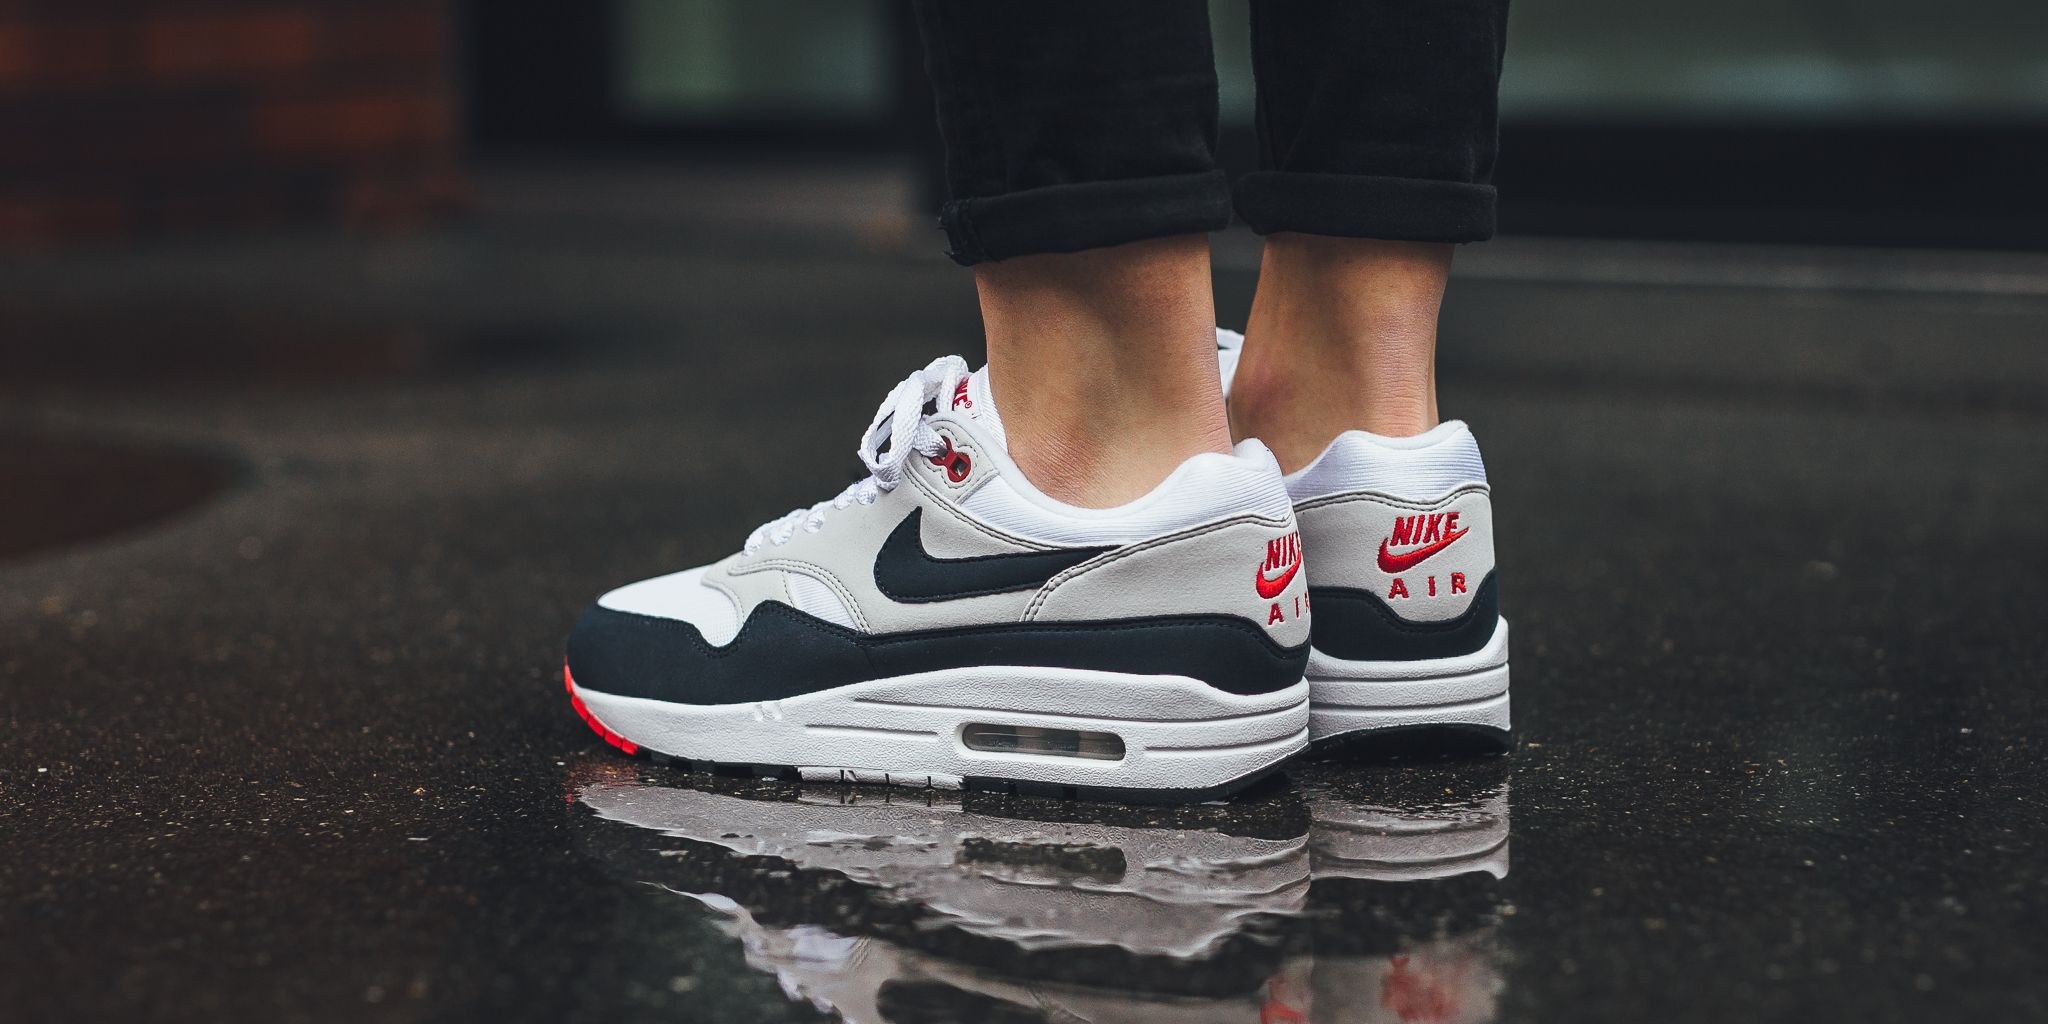 Titolo on Twitter: "NIKE AIR MAX 1 ANNIVERSARY 🔹 OBSIDIAN RELEASE 🔹Thursday, 14th December 🔹 instore first L I N K https://t.co/GCBdiOPMIt #nike #airmax #am1 #og #anniversary #obsidian # nikeairmax1 #airmax1 https://t.co/nusBKDL9Pl" /